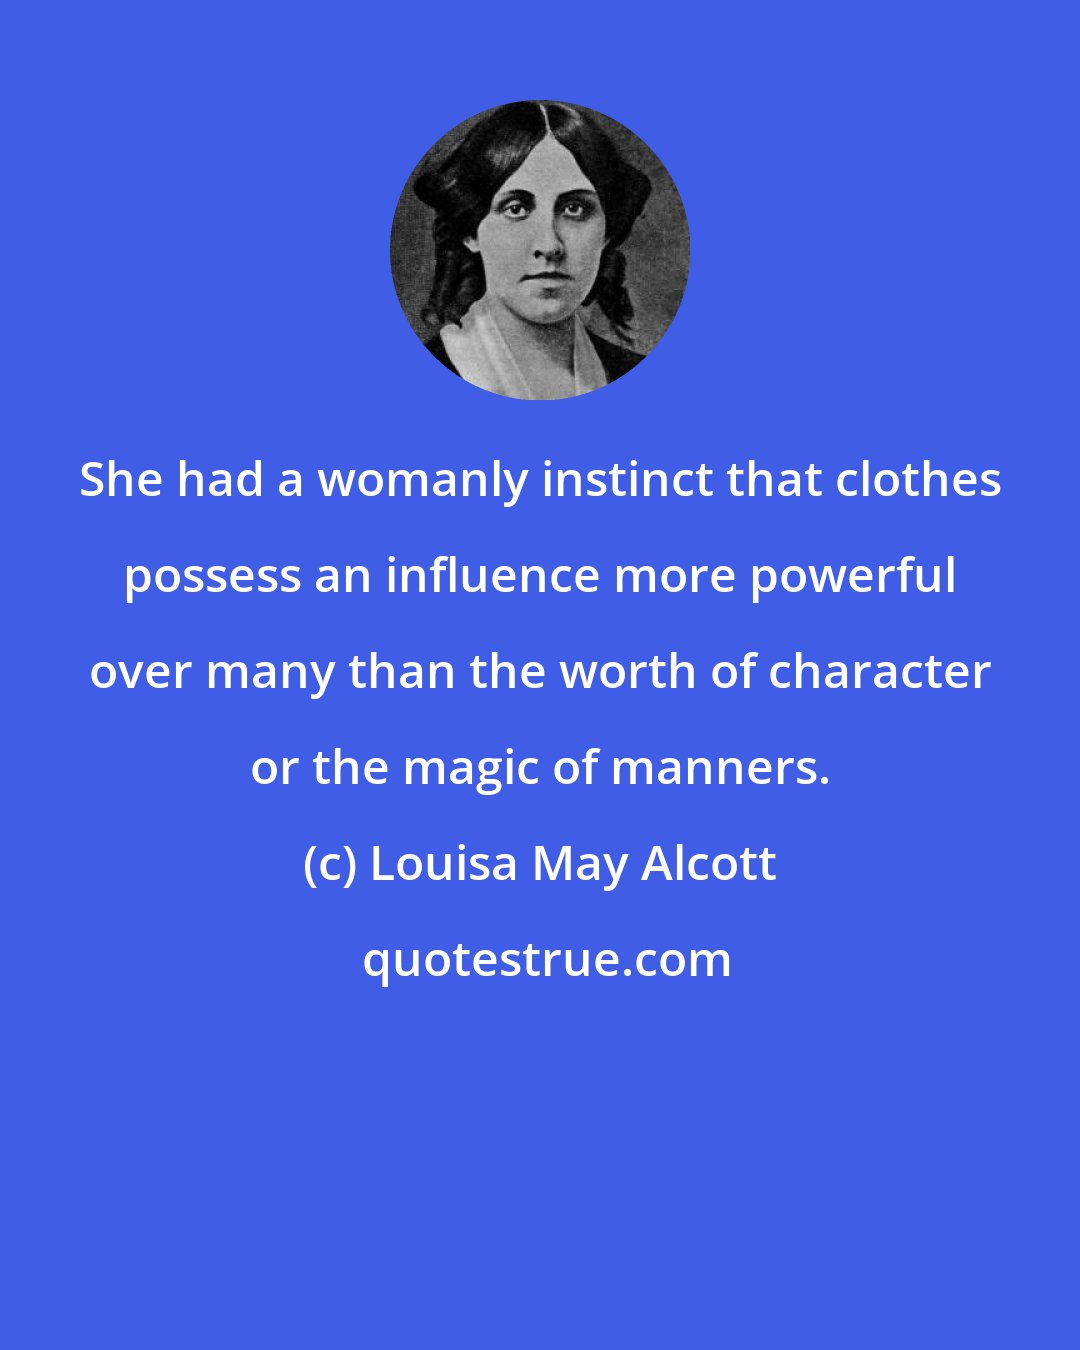 Louisa May Alcott: She had a womanly instinct that clothes possess an influence more powerful over many than the worth of character or the magic of manners.